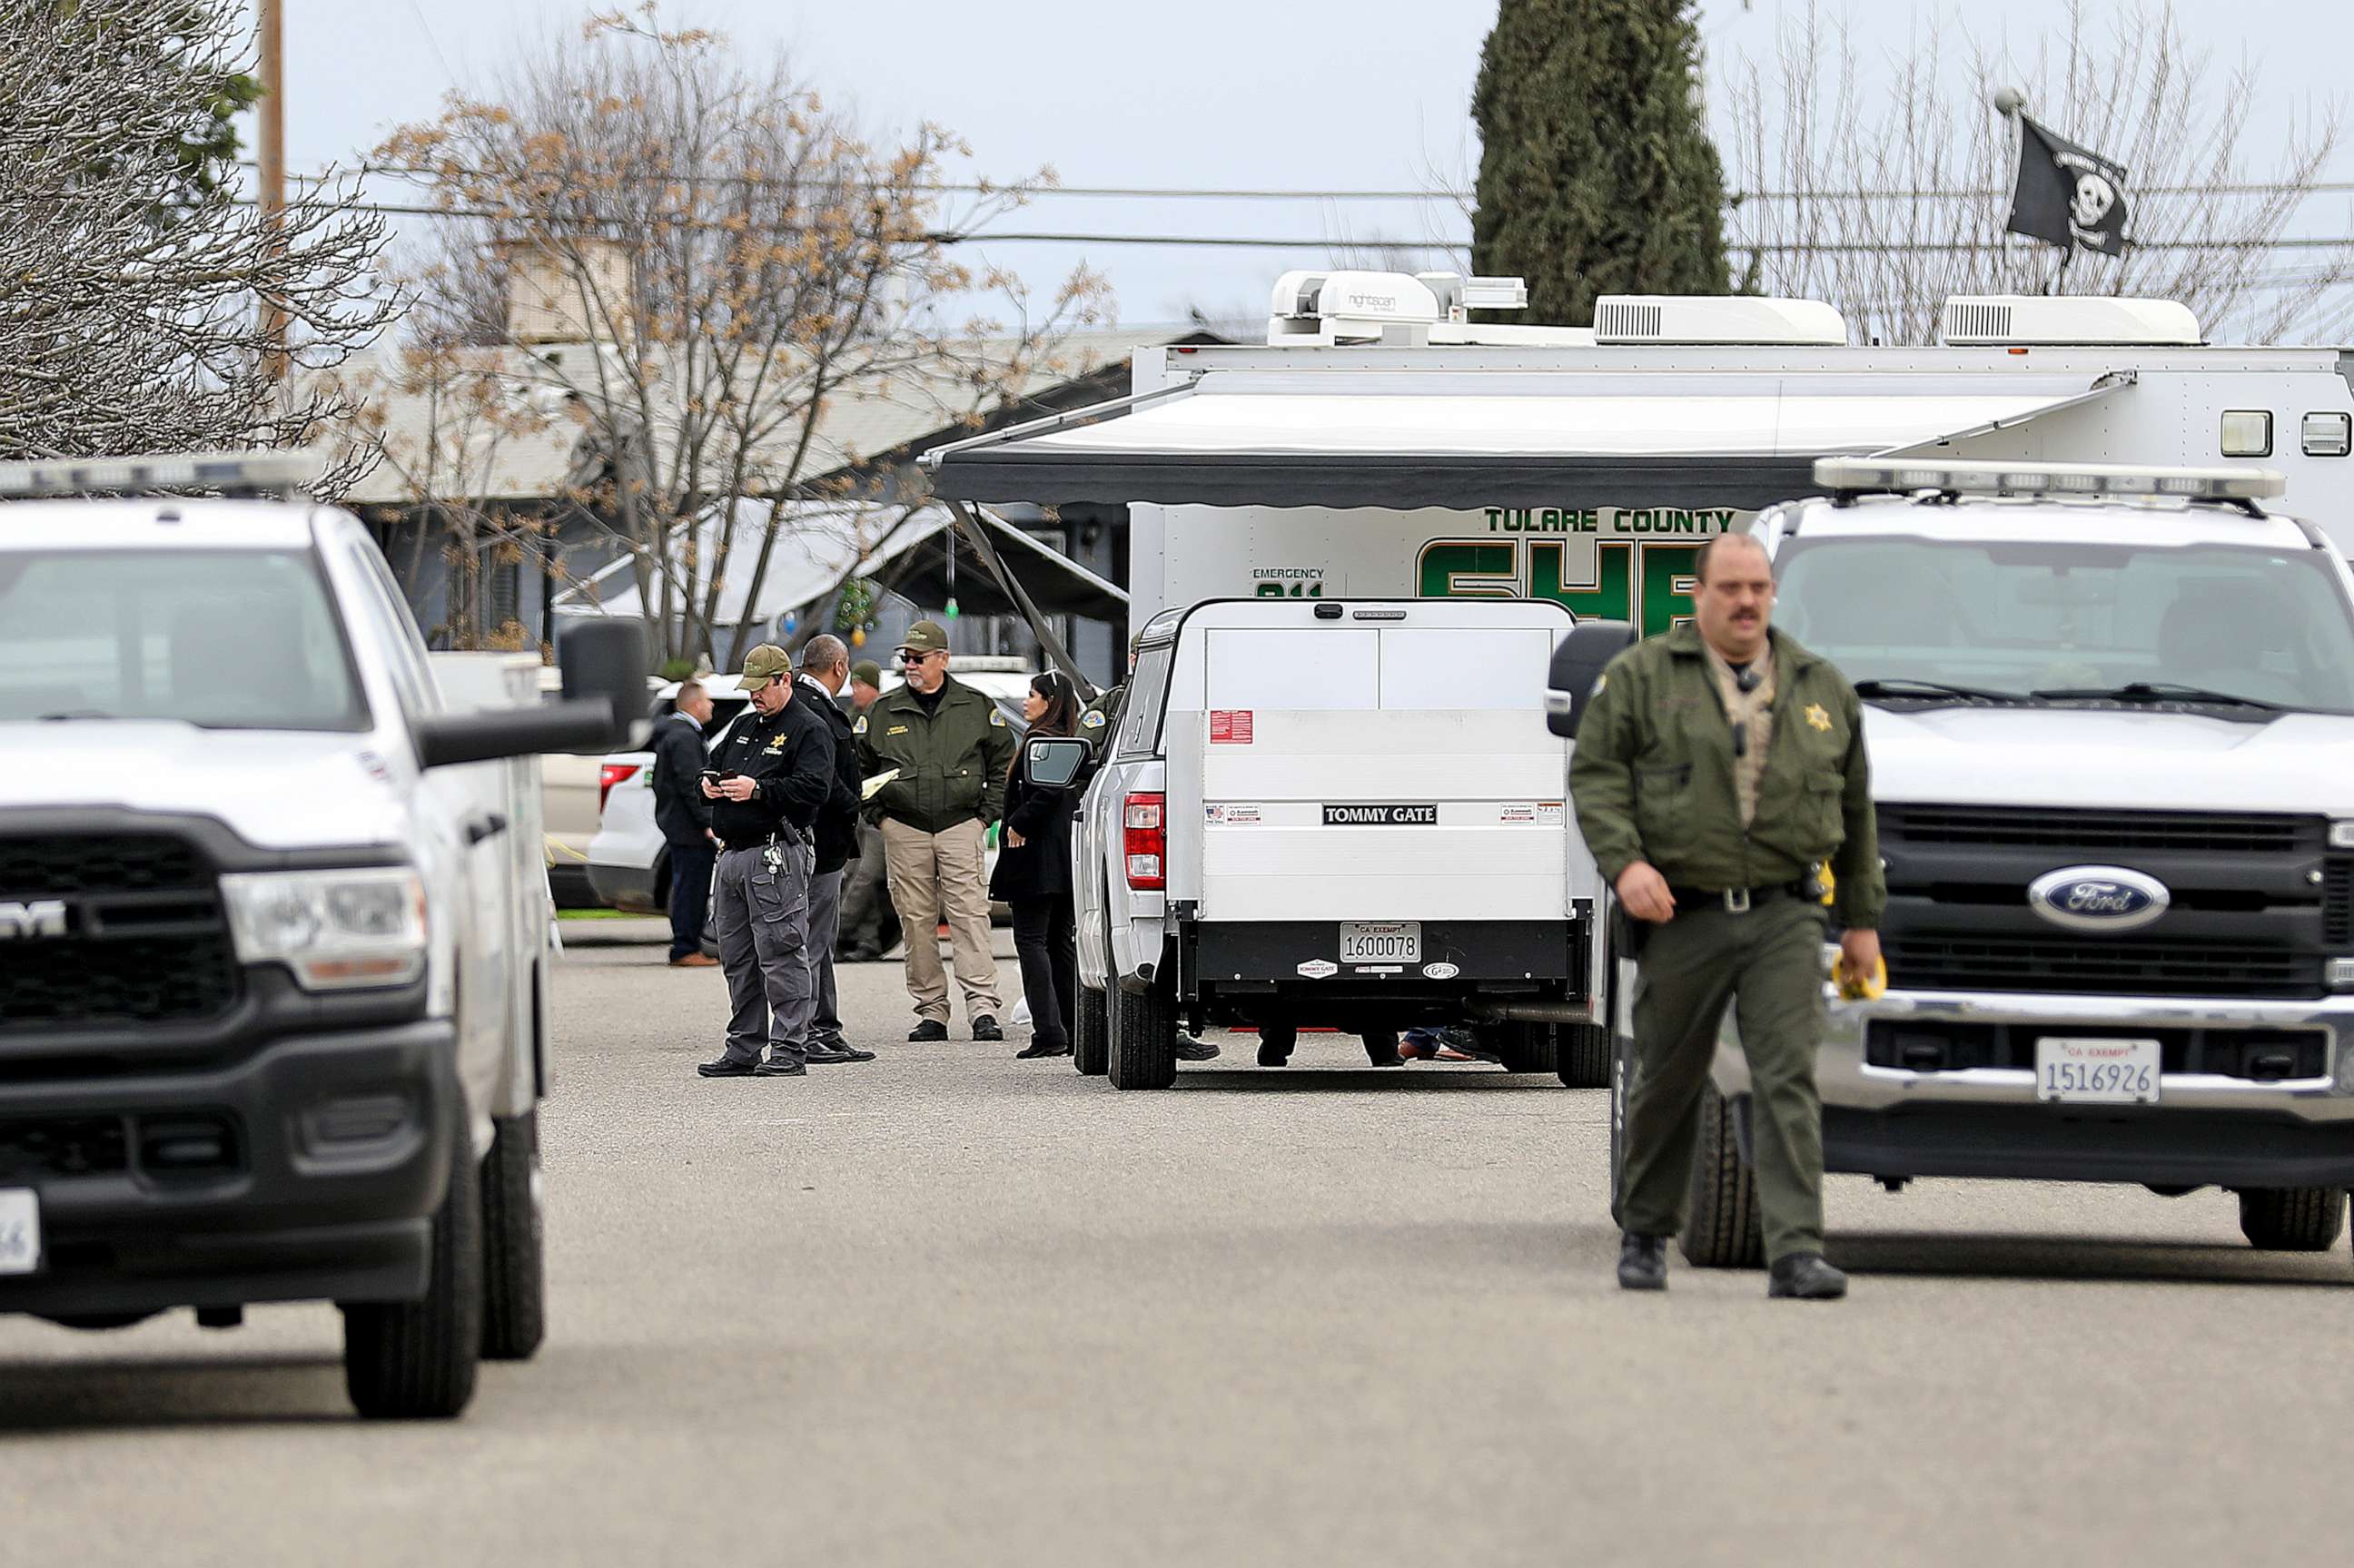 PHOTO: Tulare County Sheriff crime unit investigates the scene where six people were killed in a Central Valley farming community, Jan. 16, 2023 in Goshen, Calif.